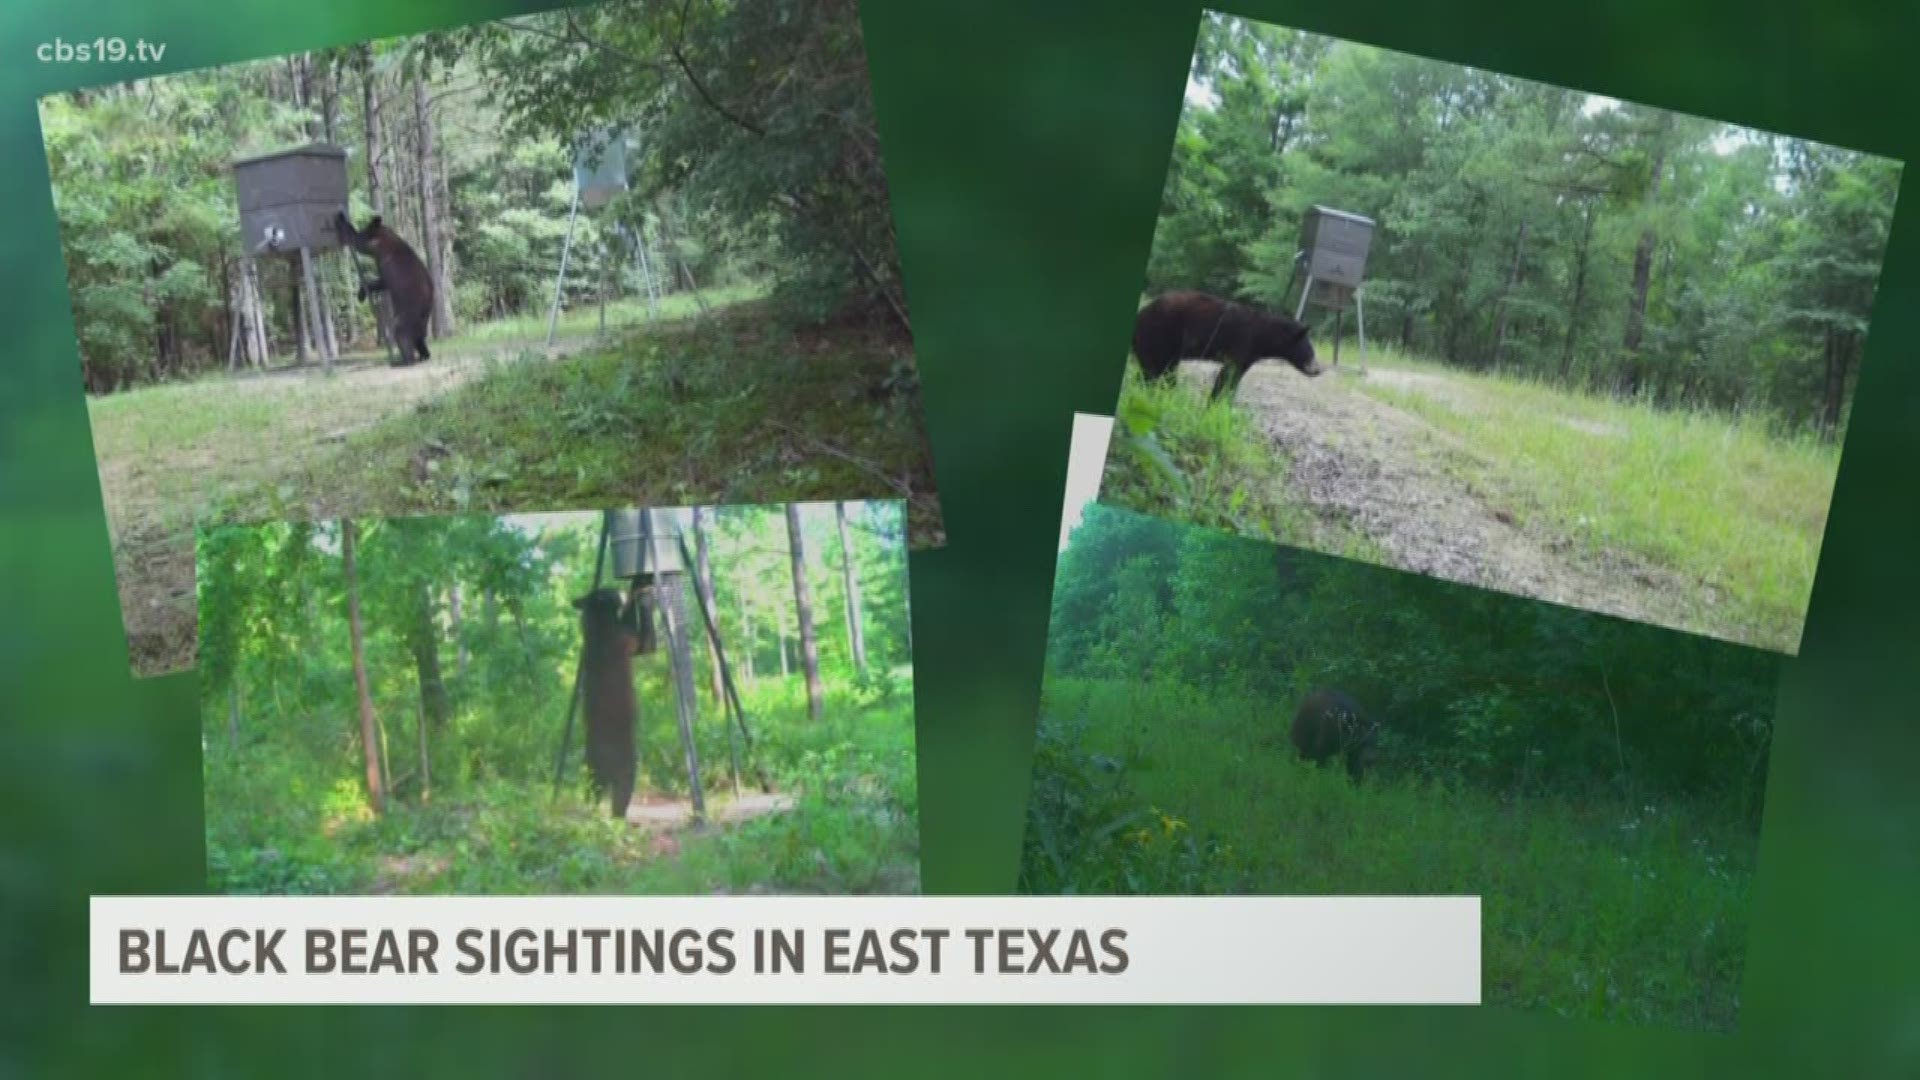 The Texas Parks and Wildlife Department (TPWD) is asking East Texans to be on the lookout after black bears were spotted on multiple occasions in the Piney Woods.